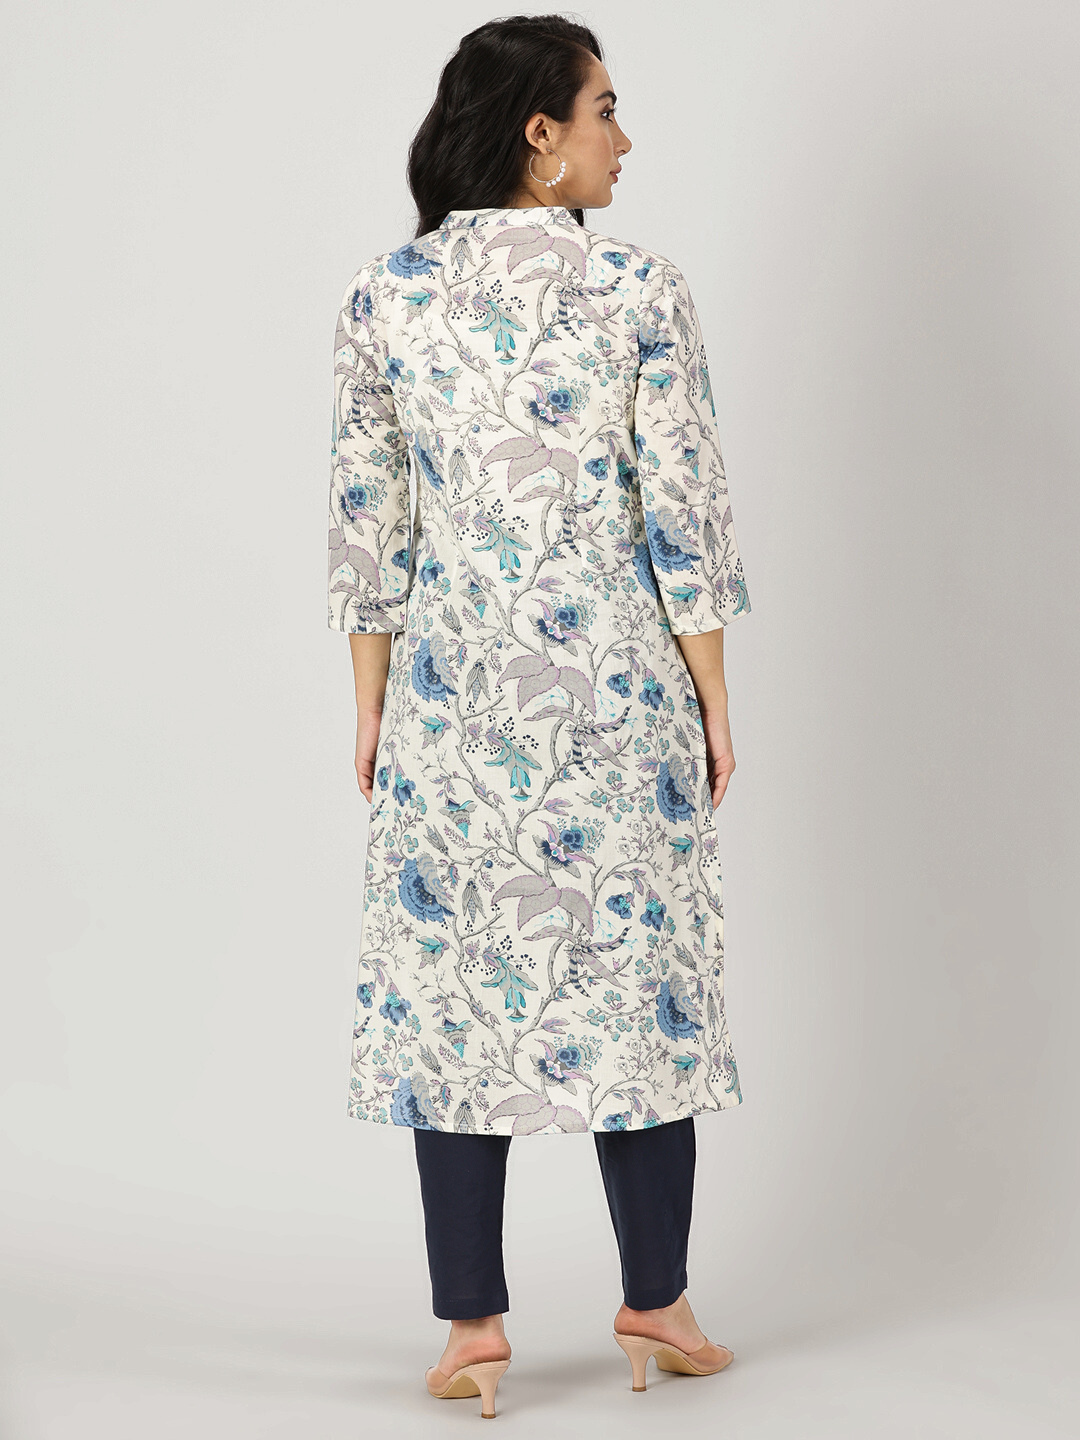 White-Blue Ethnic Floral Print Kurta with Neck Embroidery